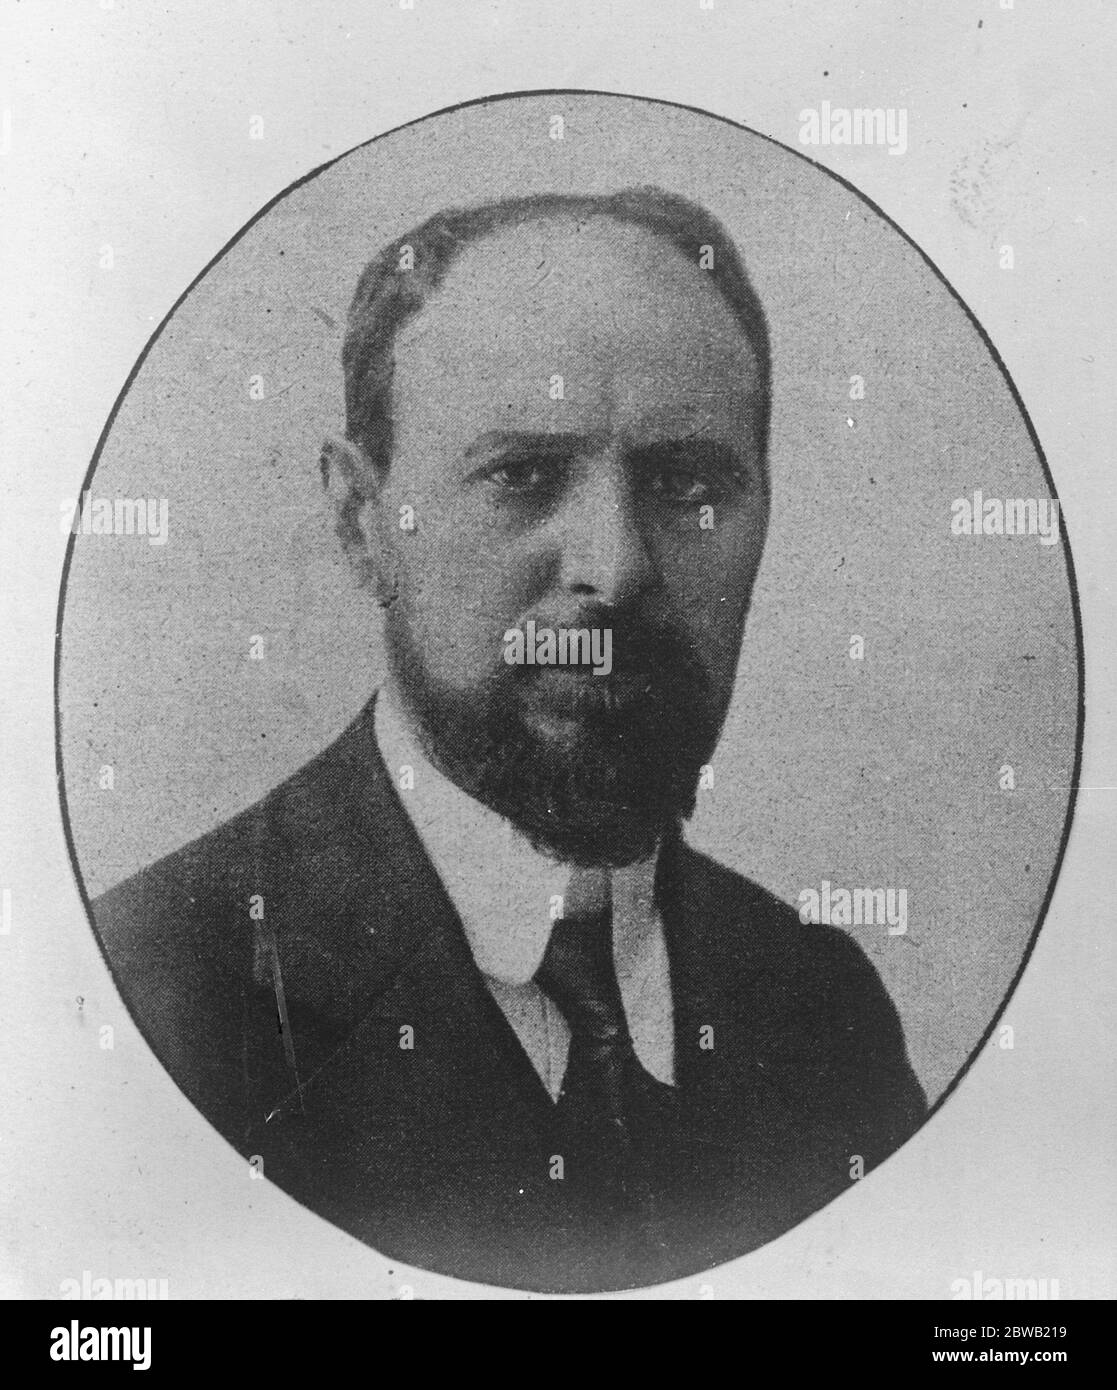 Bulgarian Revolt Frustrated . M Alexander Zankoff head of the Bulgarian goverment whichh has frustrated the Communist revolt 22 September 1923 Stock Photo